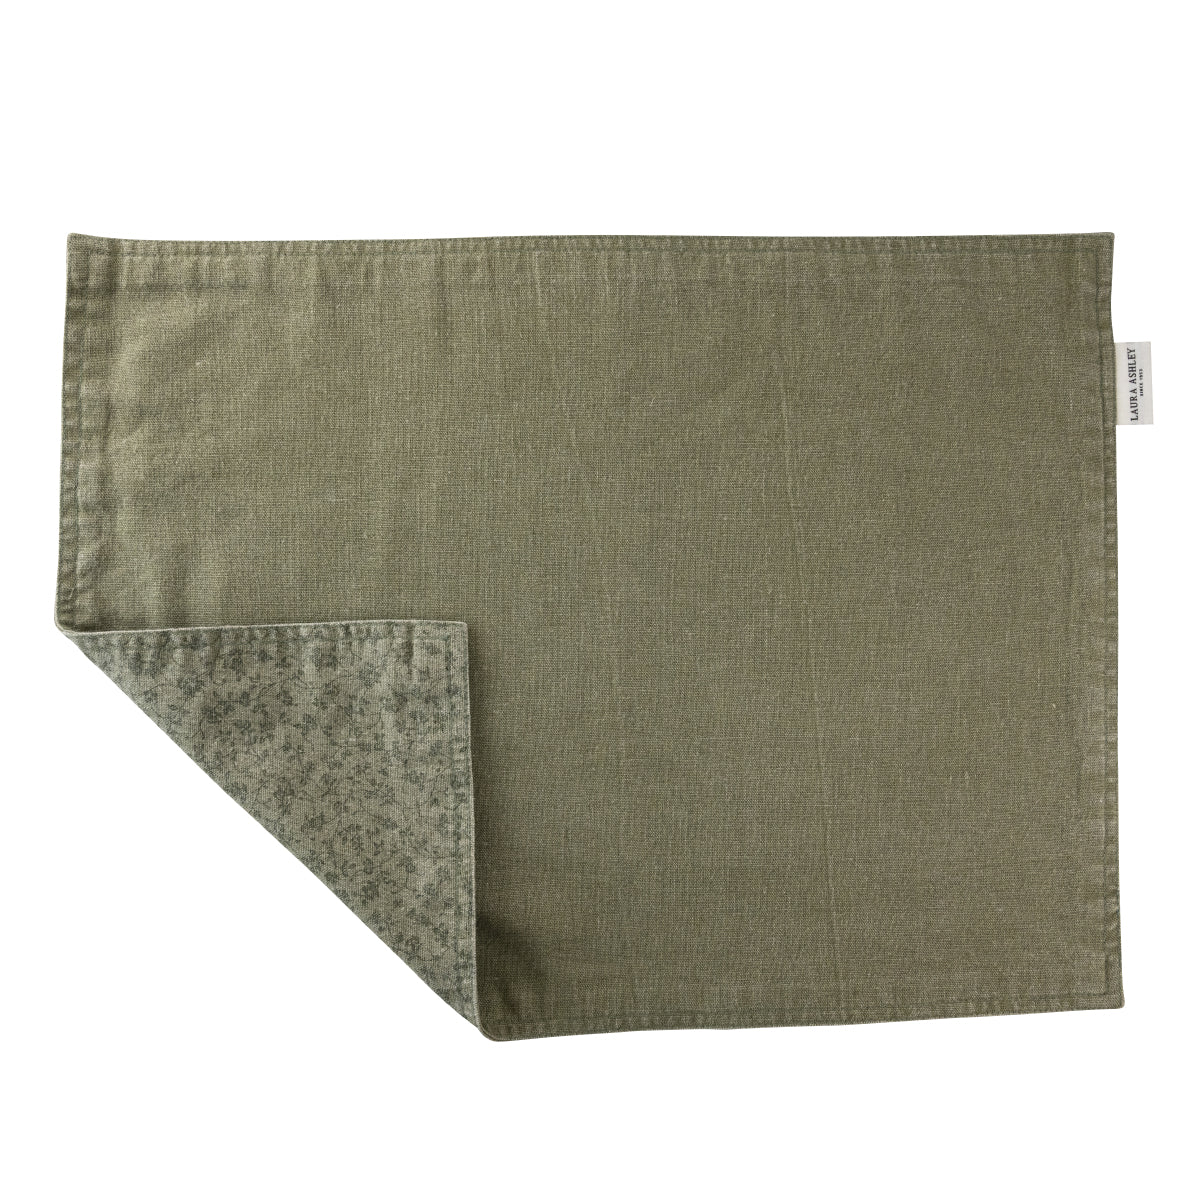 Laura Ashley Placemat Sage green double sided Uni/Wild Clematis 48x35cm